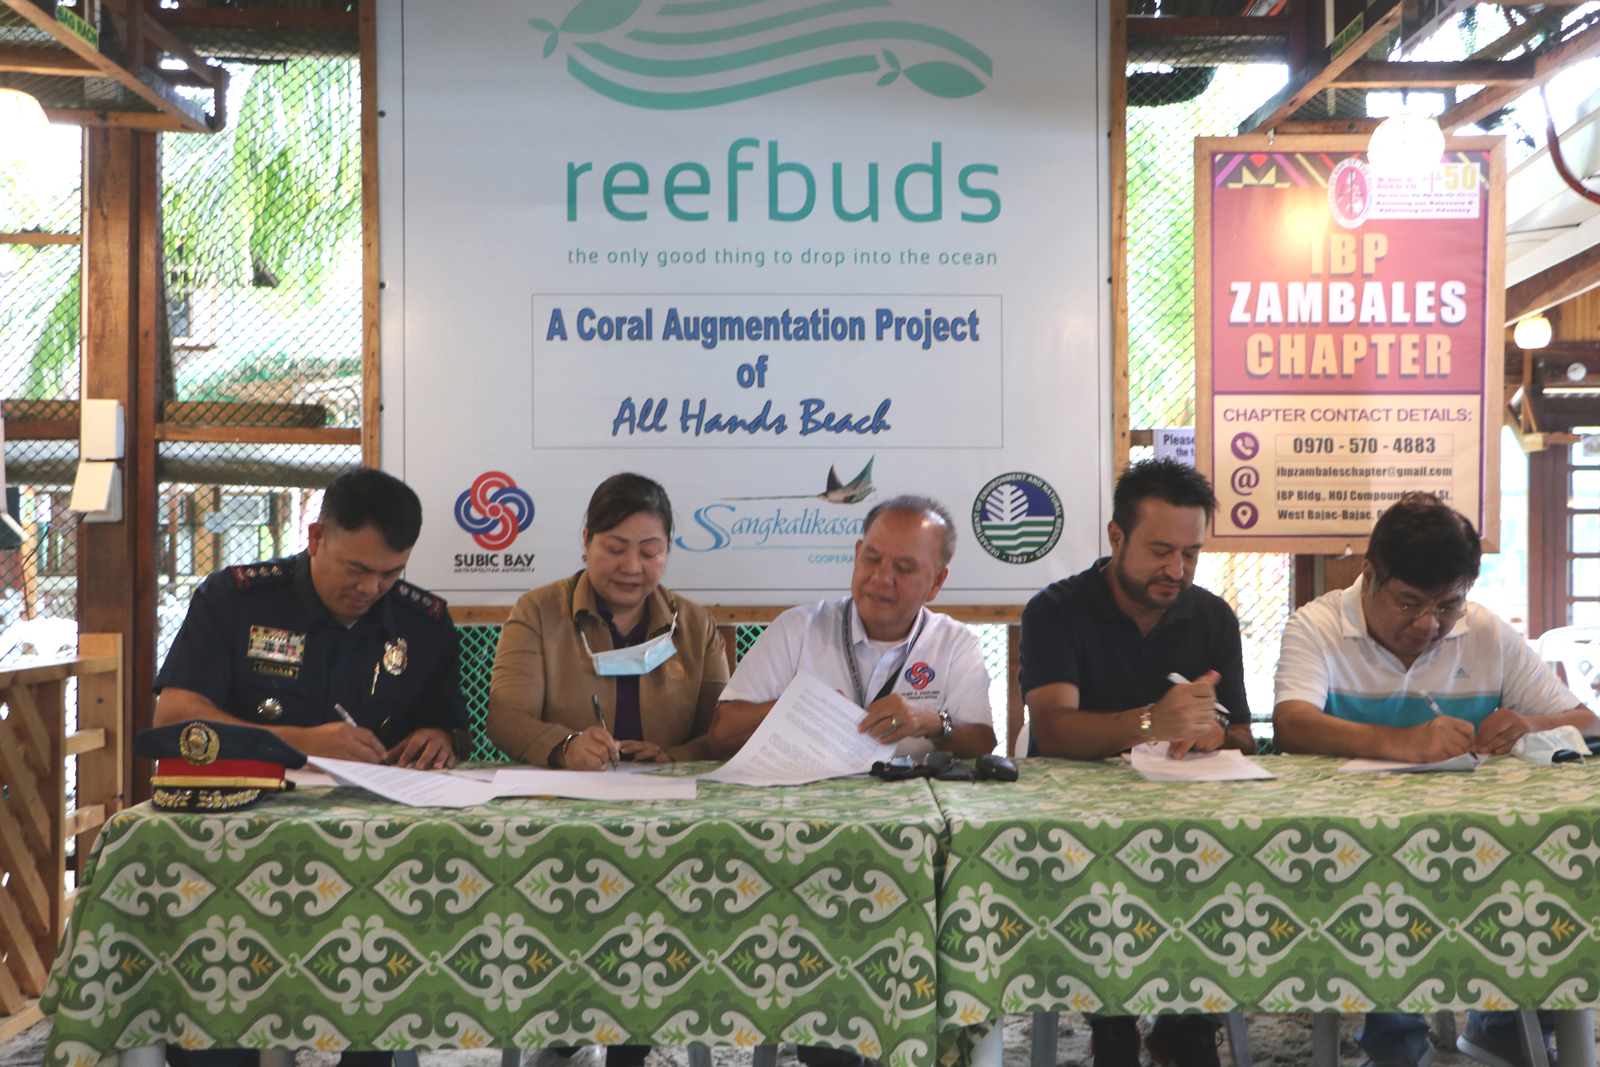 SBMA Chairman and Administrator Rolen C. Paulino (center), signs a Memorandum of Partnership Agreement with Marife L. Castillo, Provincial Environment and Natural Resources Officer of Zambales; Mark S. Dayrit (second from right), Chairman of Brighterday Subic Ltd. Inc., operator of All Hands Beach Resort; Jose Rodriguez of Sangkalikasan, a non-government organization and P/Col. Fernando Cunanan Jr. of the PNP Regional Maritime Unit for a collaborative partnership among various agencies, LGUs and NGOs in establishing and protection of marine turtle nesting areas and rehabilitation of coral reefs of Subic Bay.